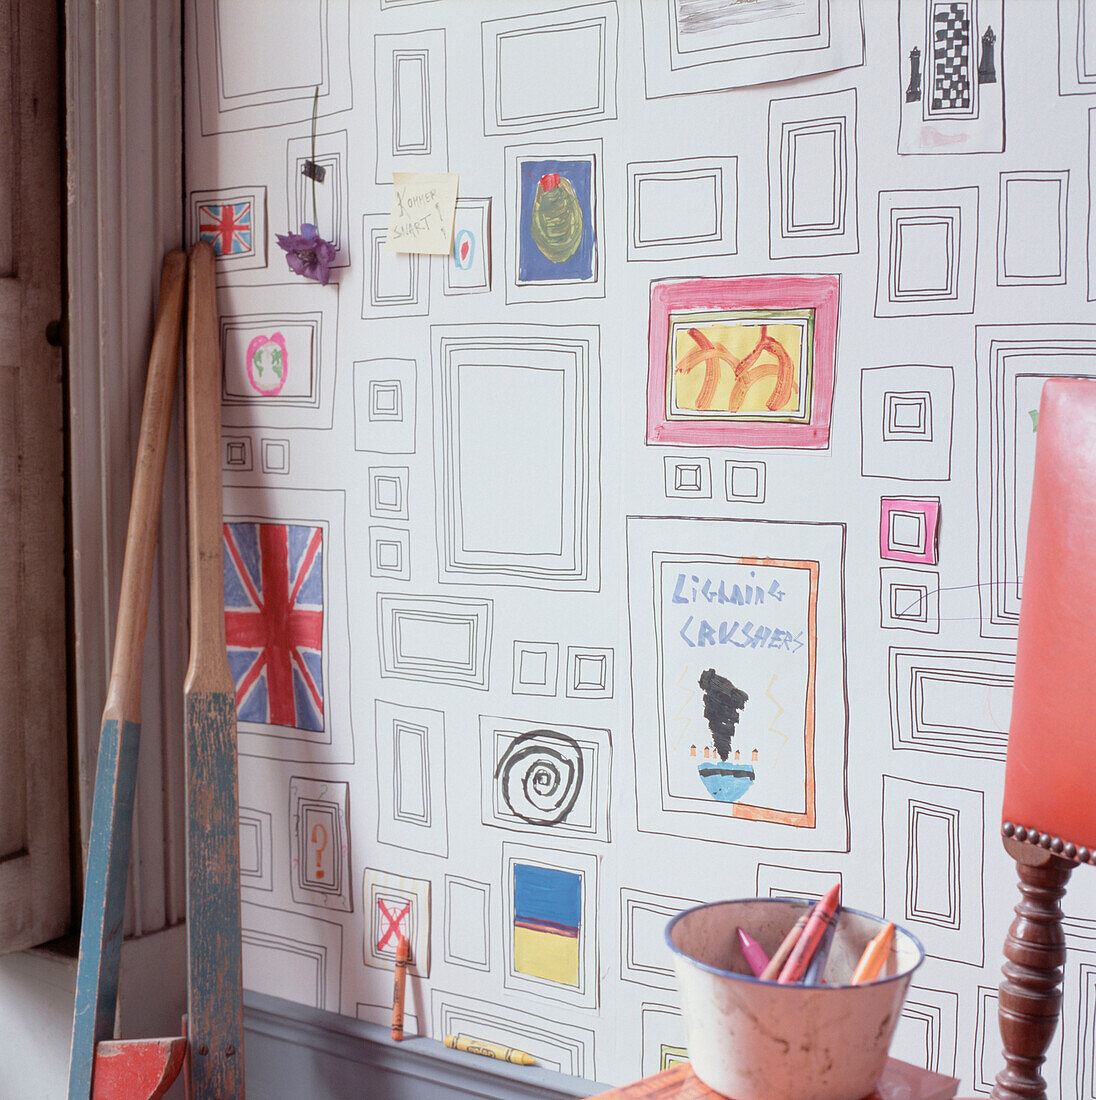 Fun wallpaper in a child's playroom